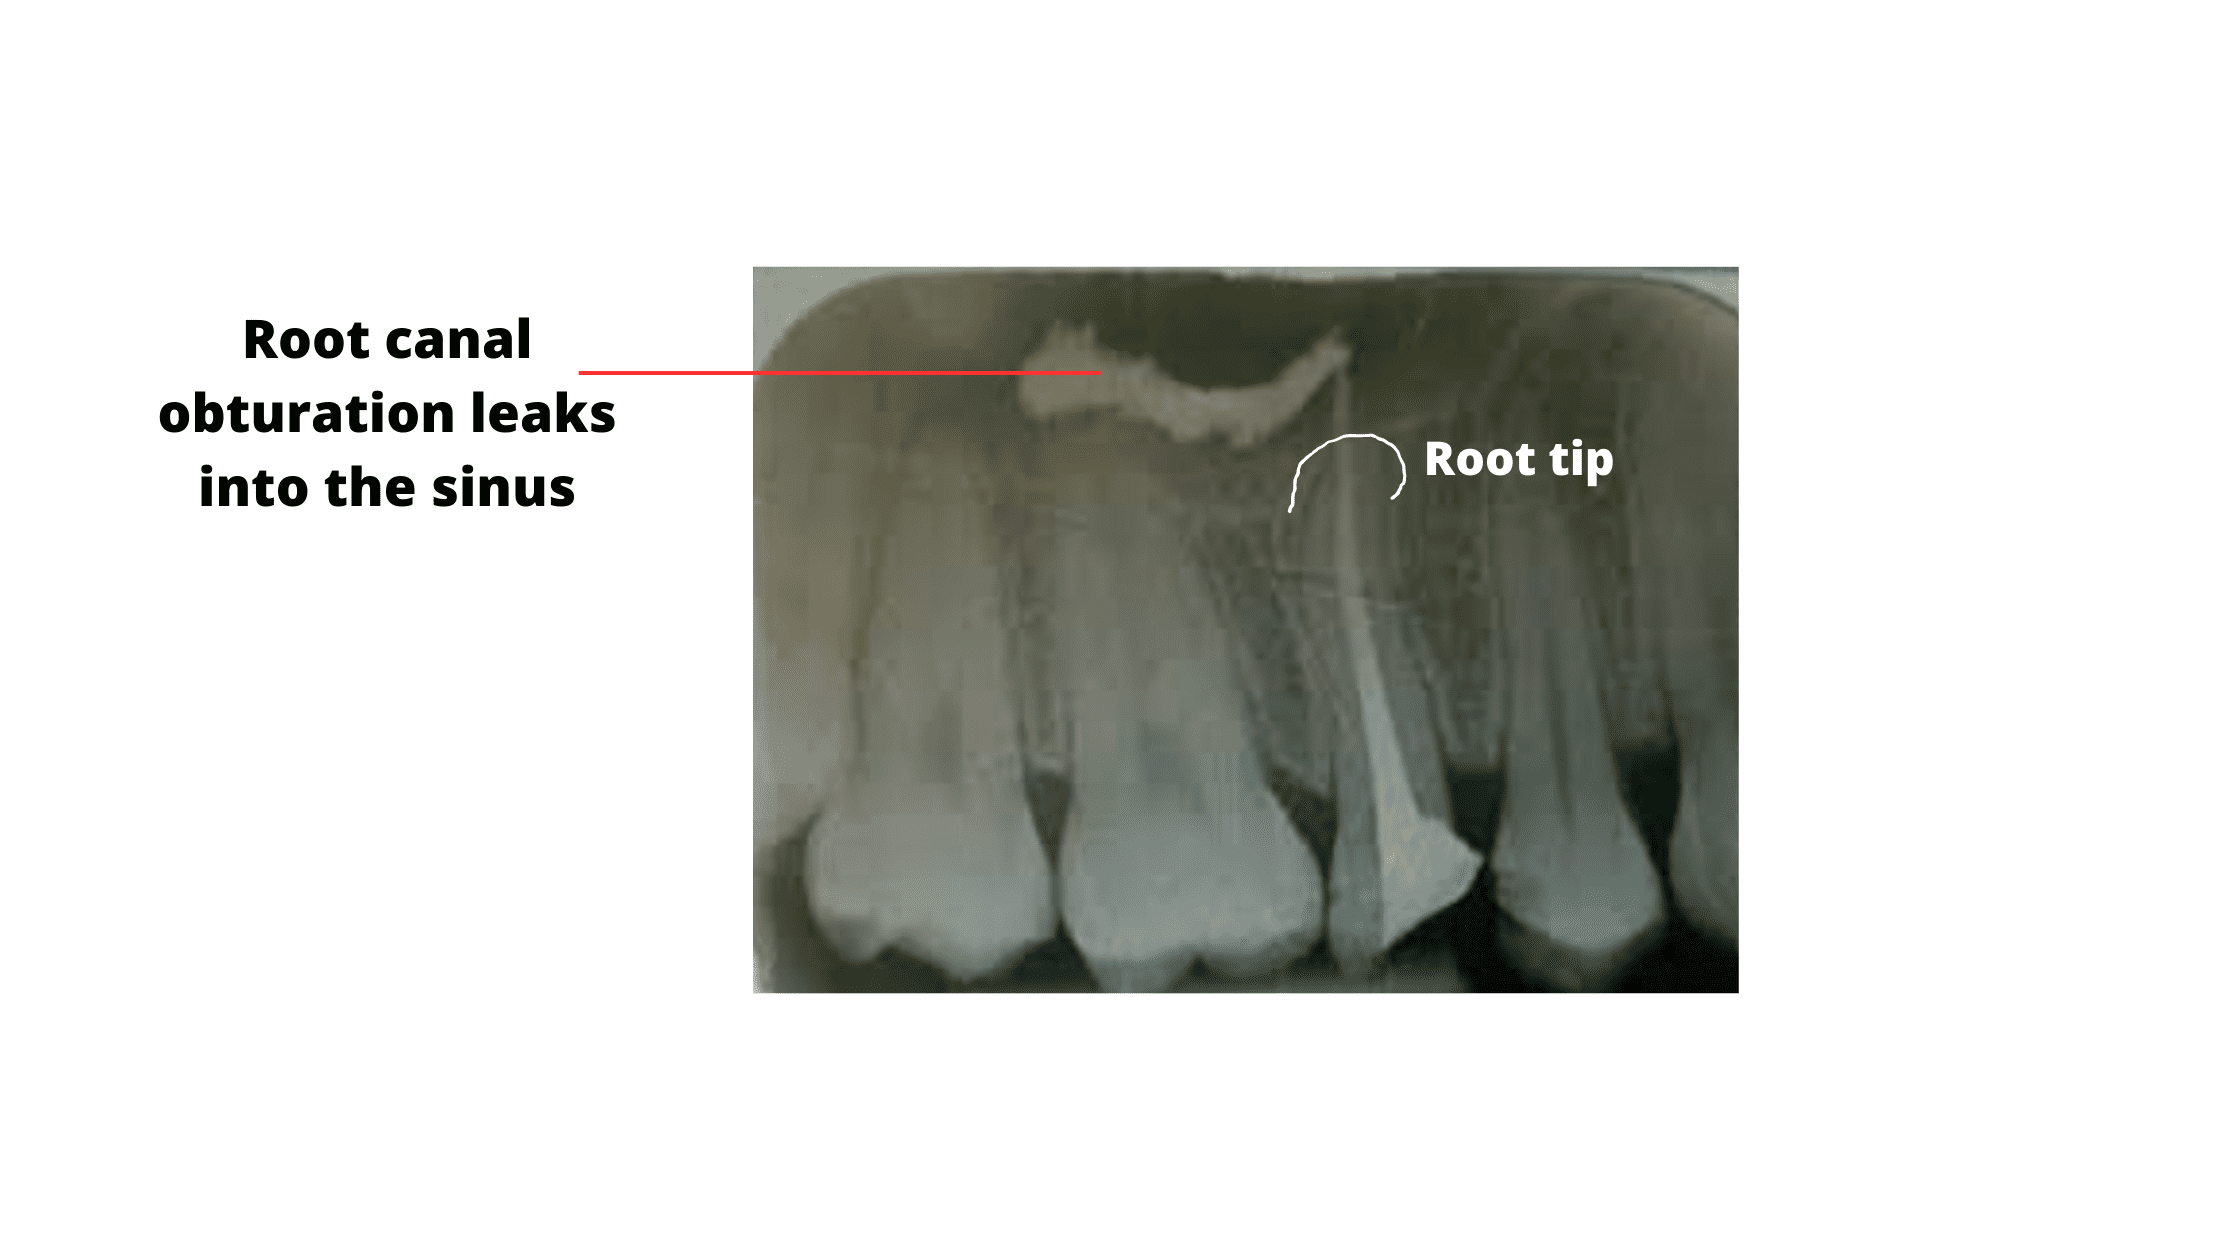 Root canal filling leakage into the sinus